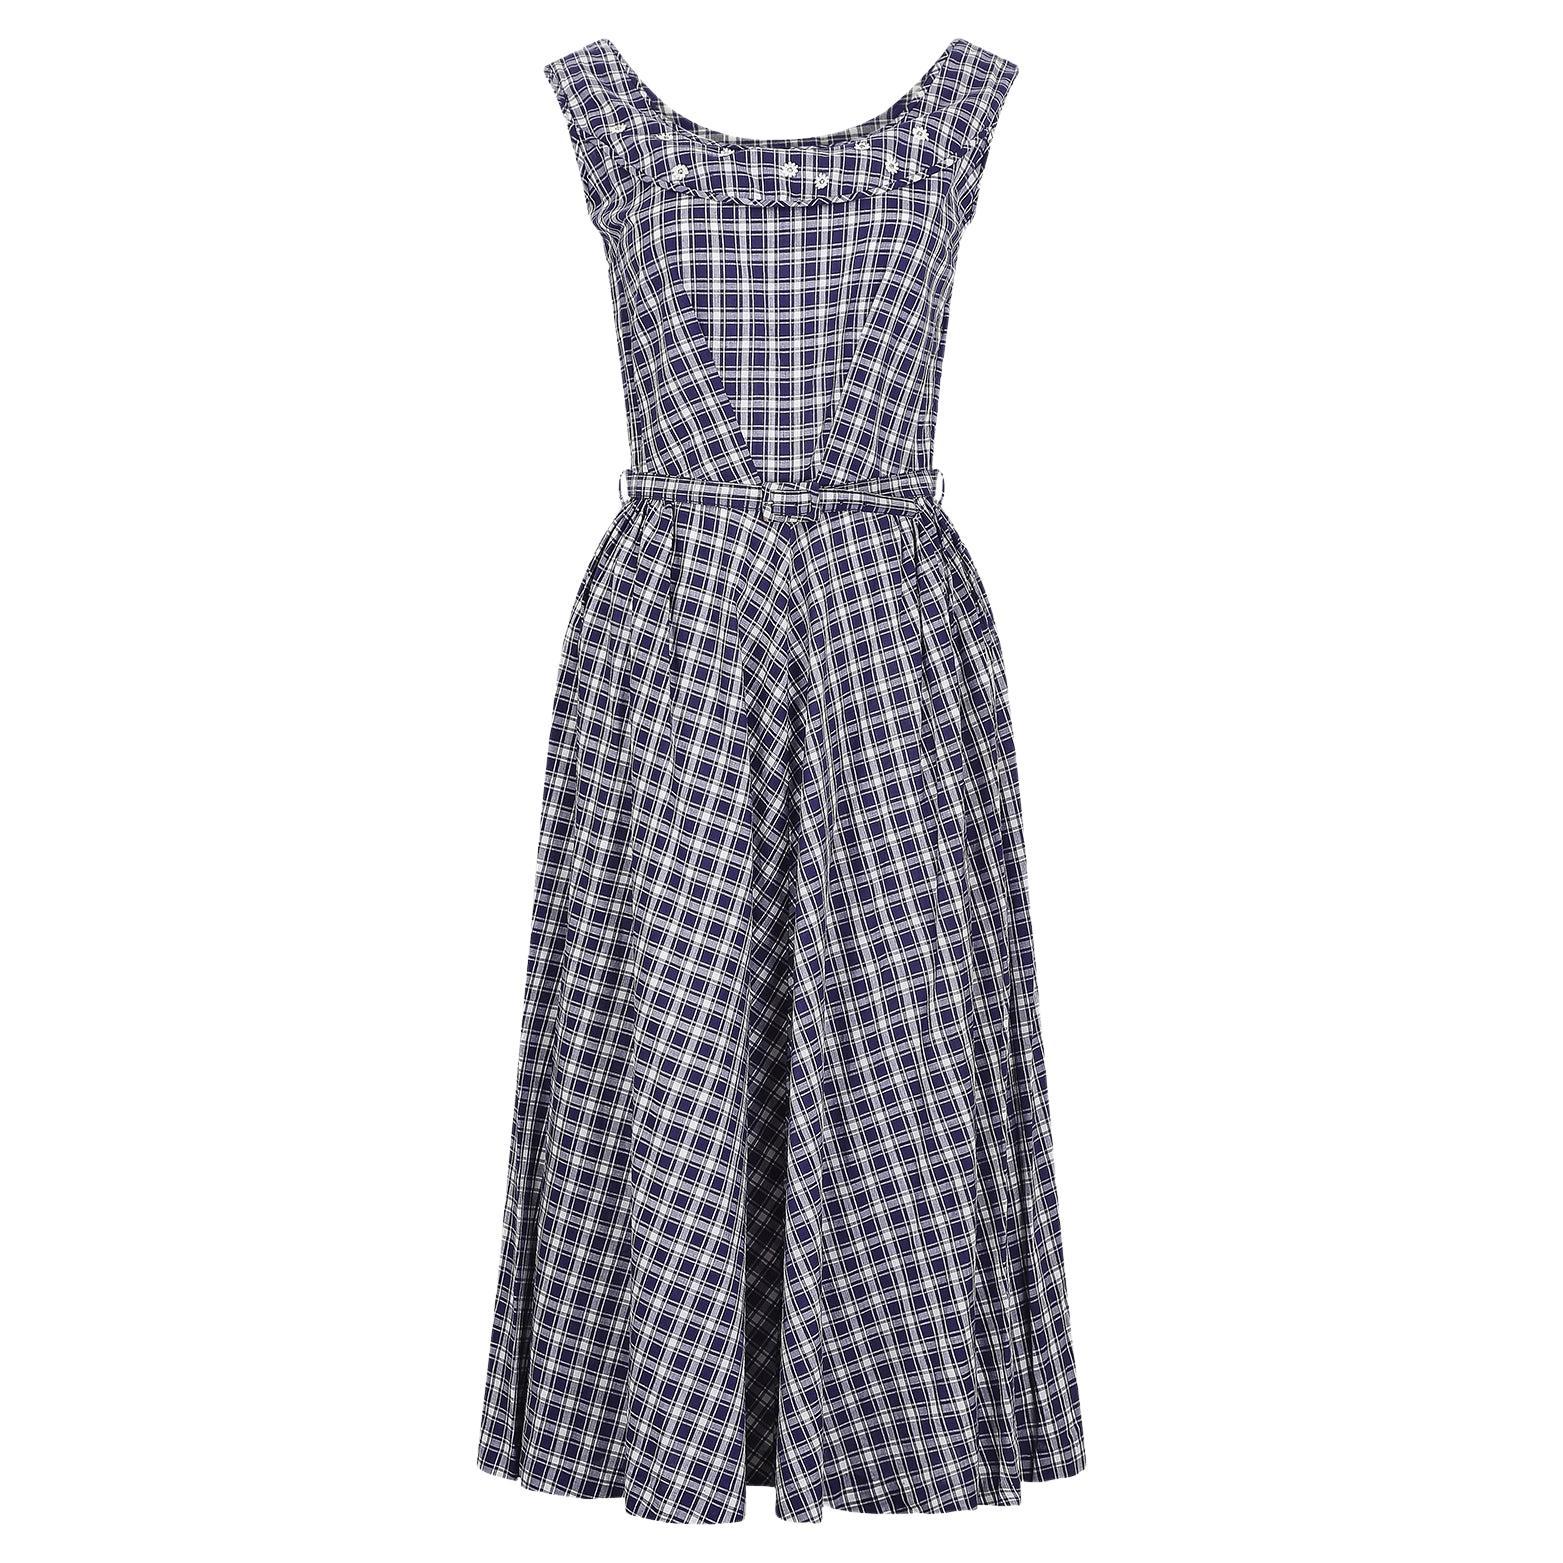 1950s Blue and White Gingham Dress